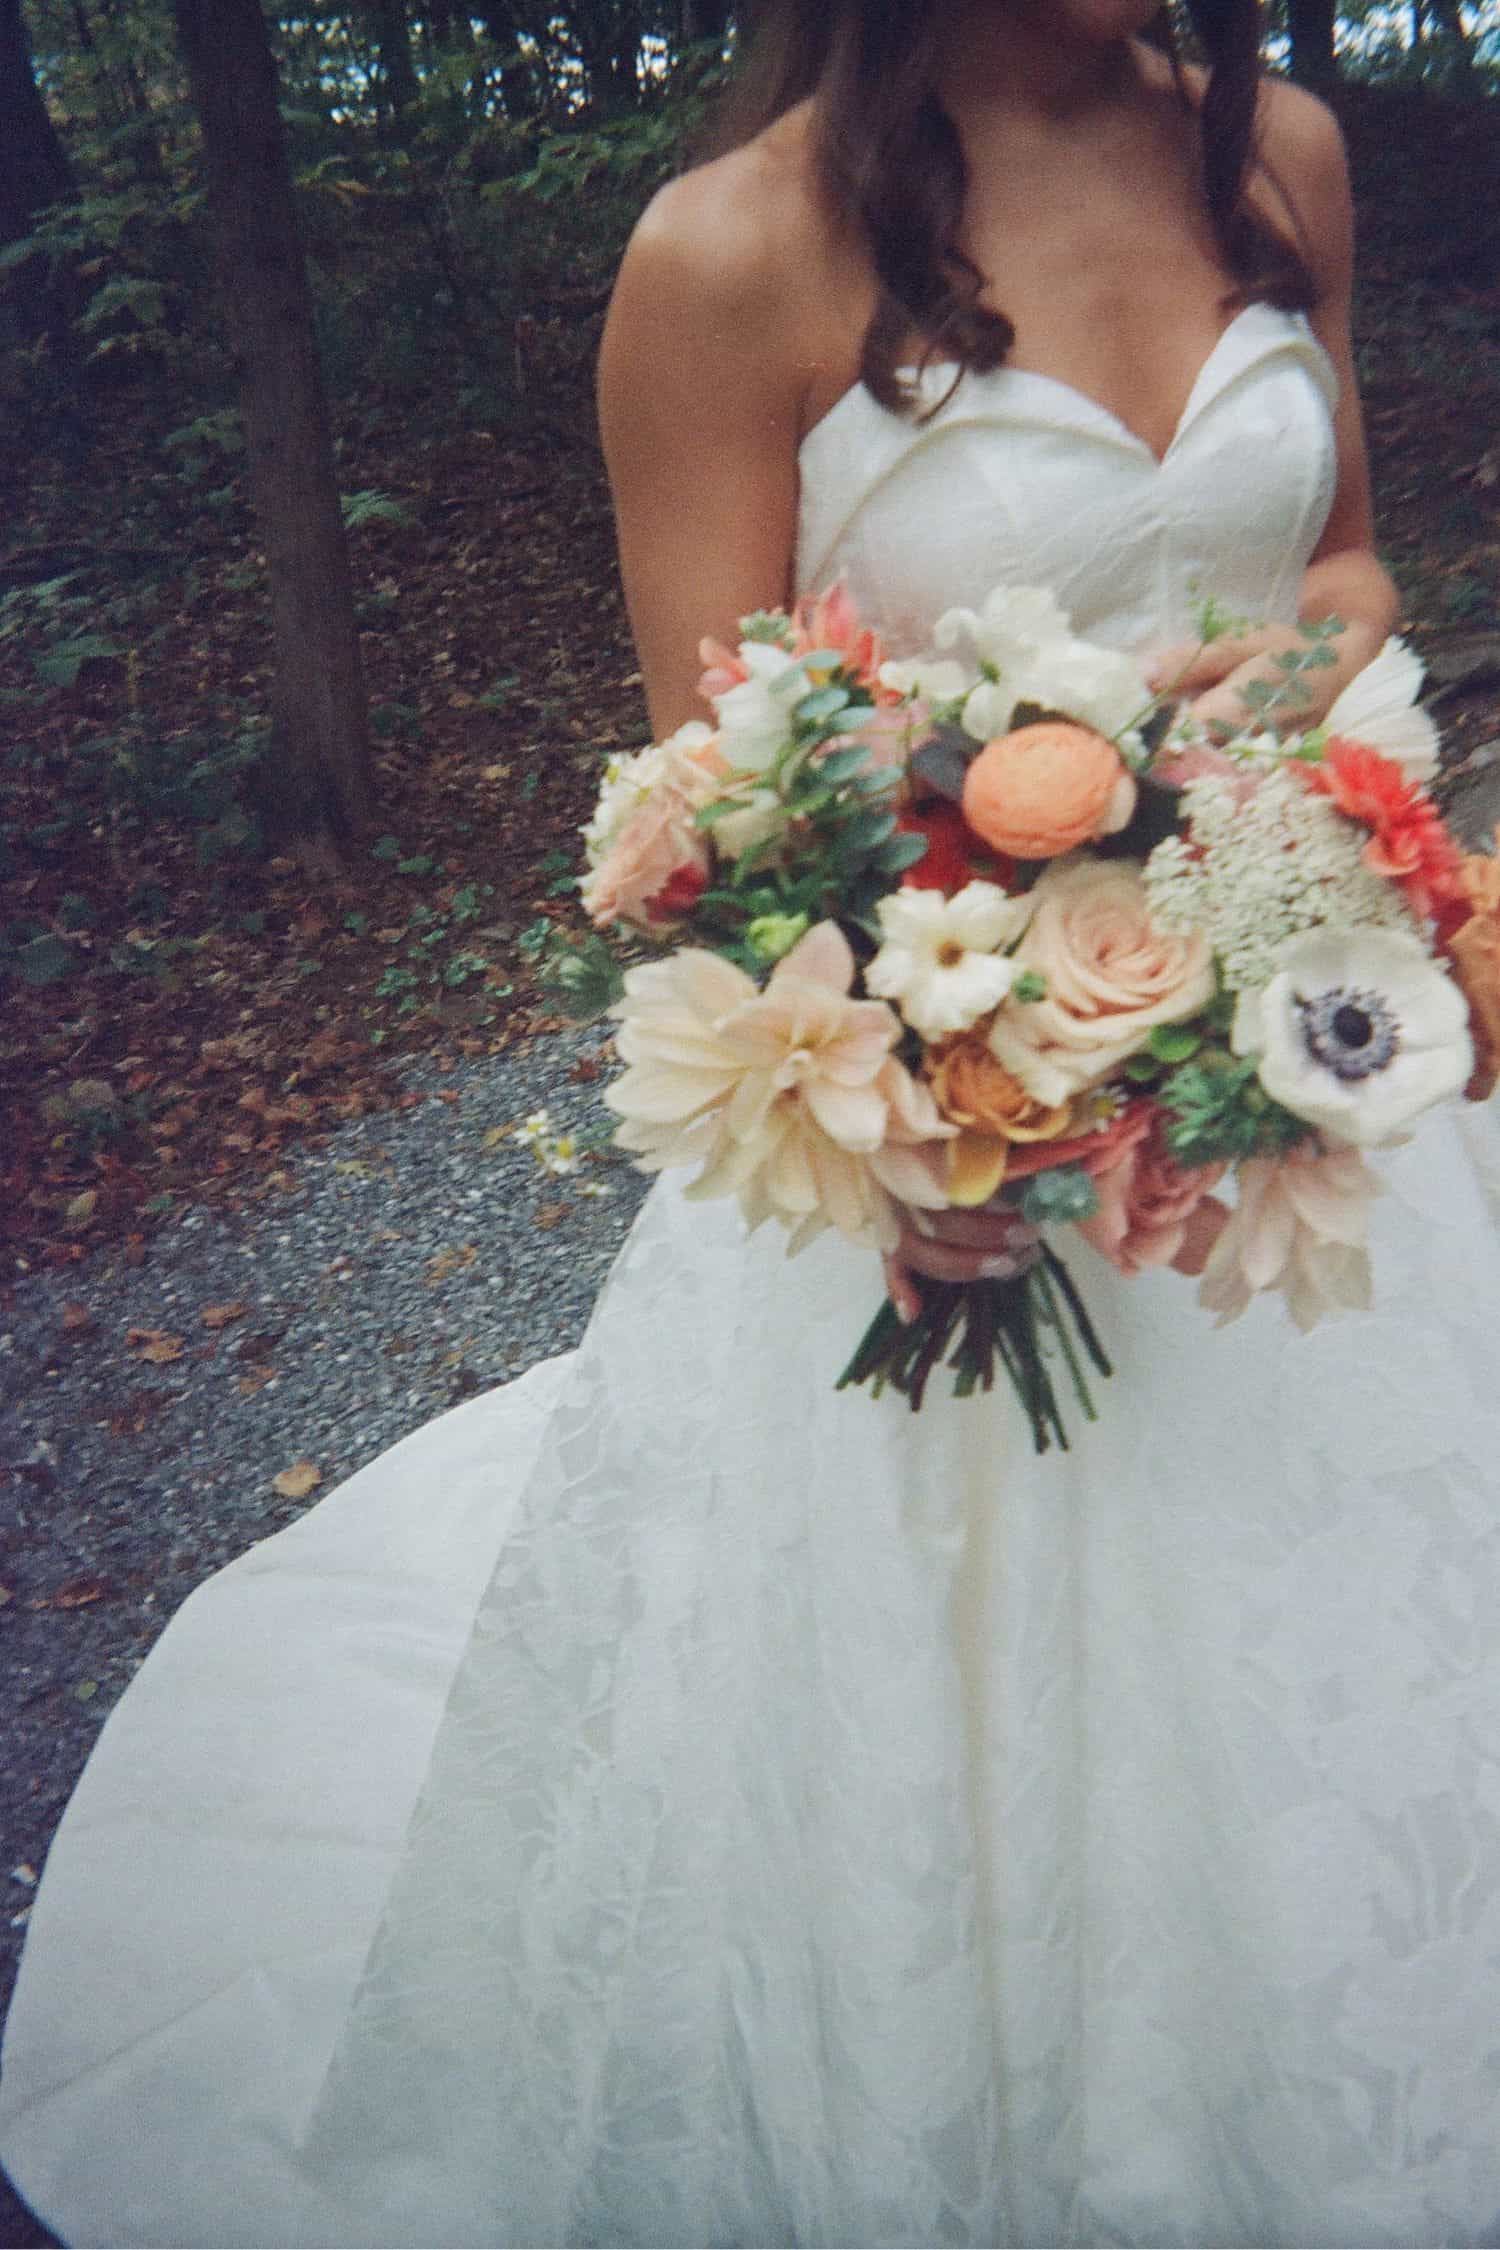 Vermont film wedding photography by The Light + Color. Apotheca Florals at Basin Harbor Wedding in Vergennes, VT 